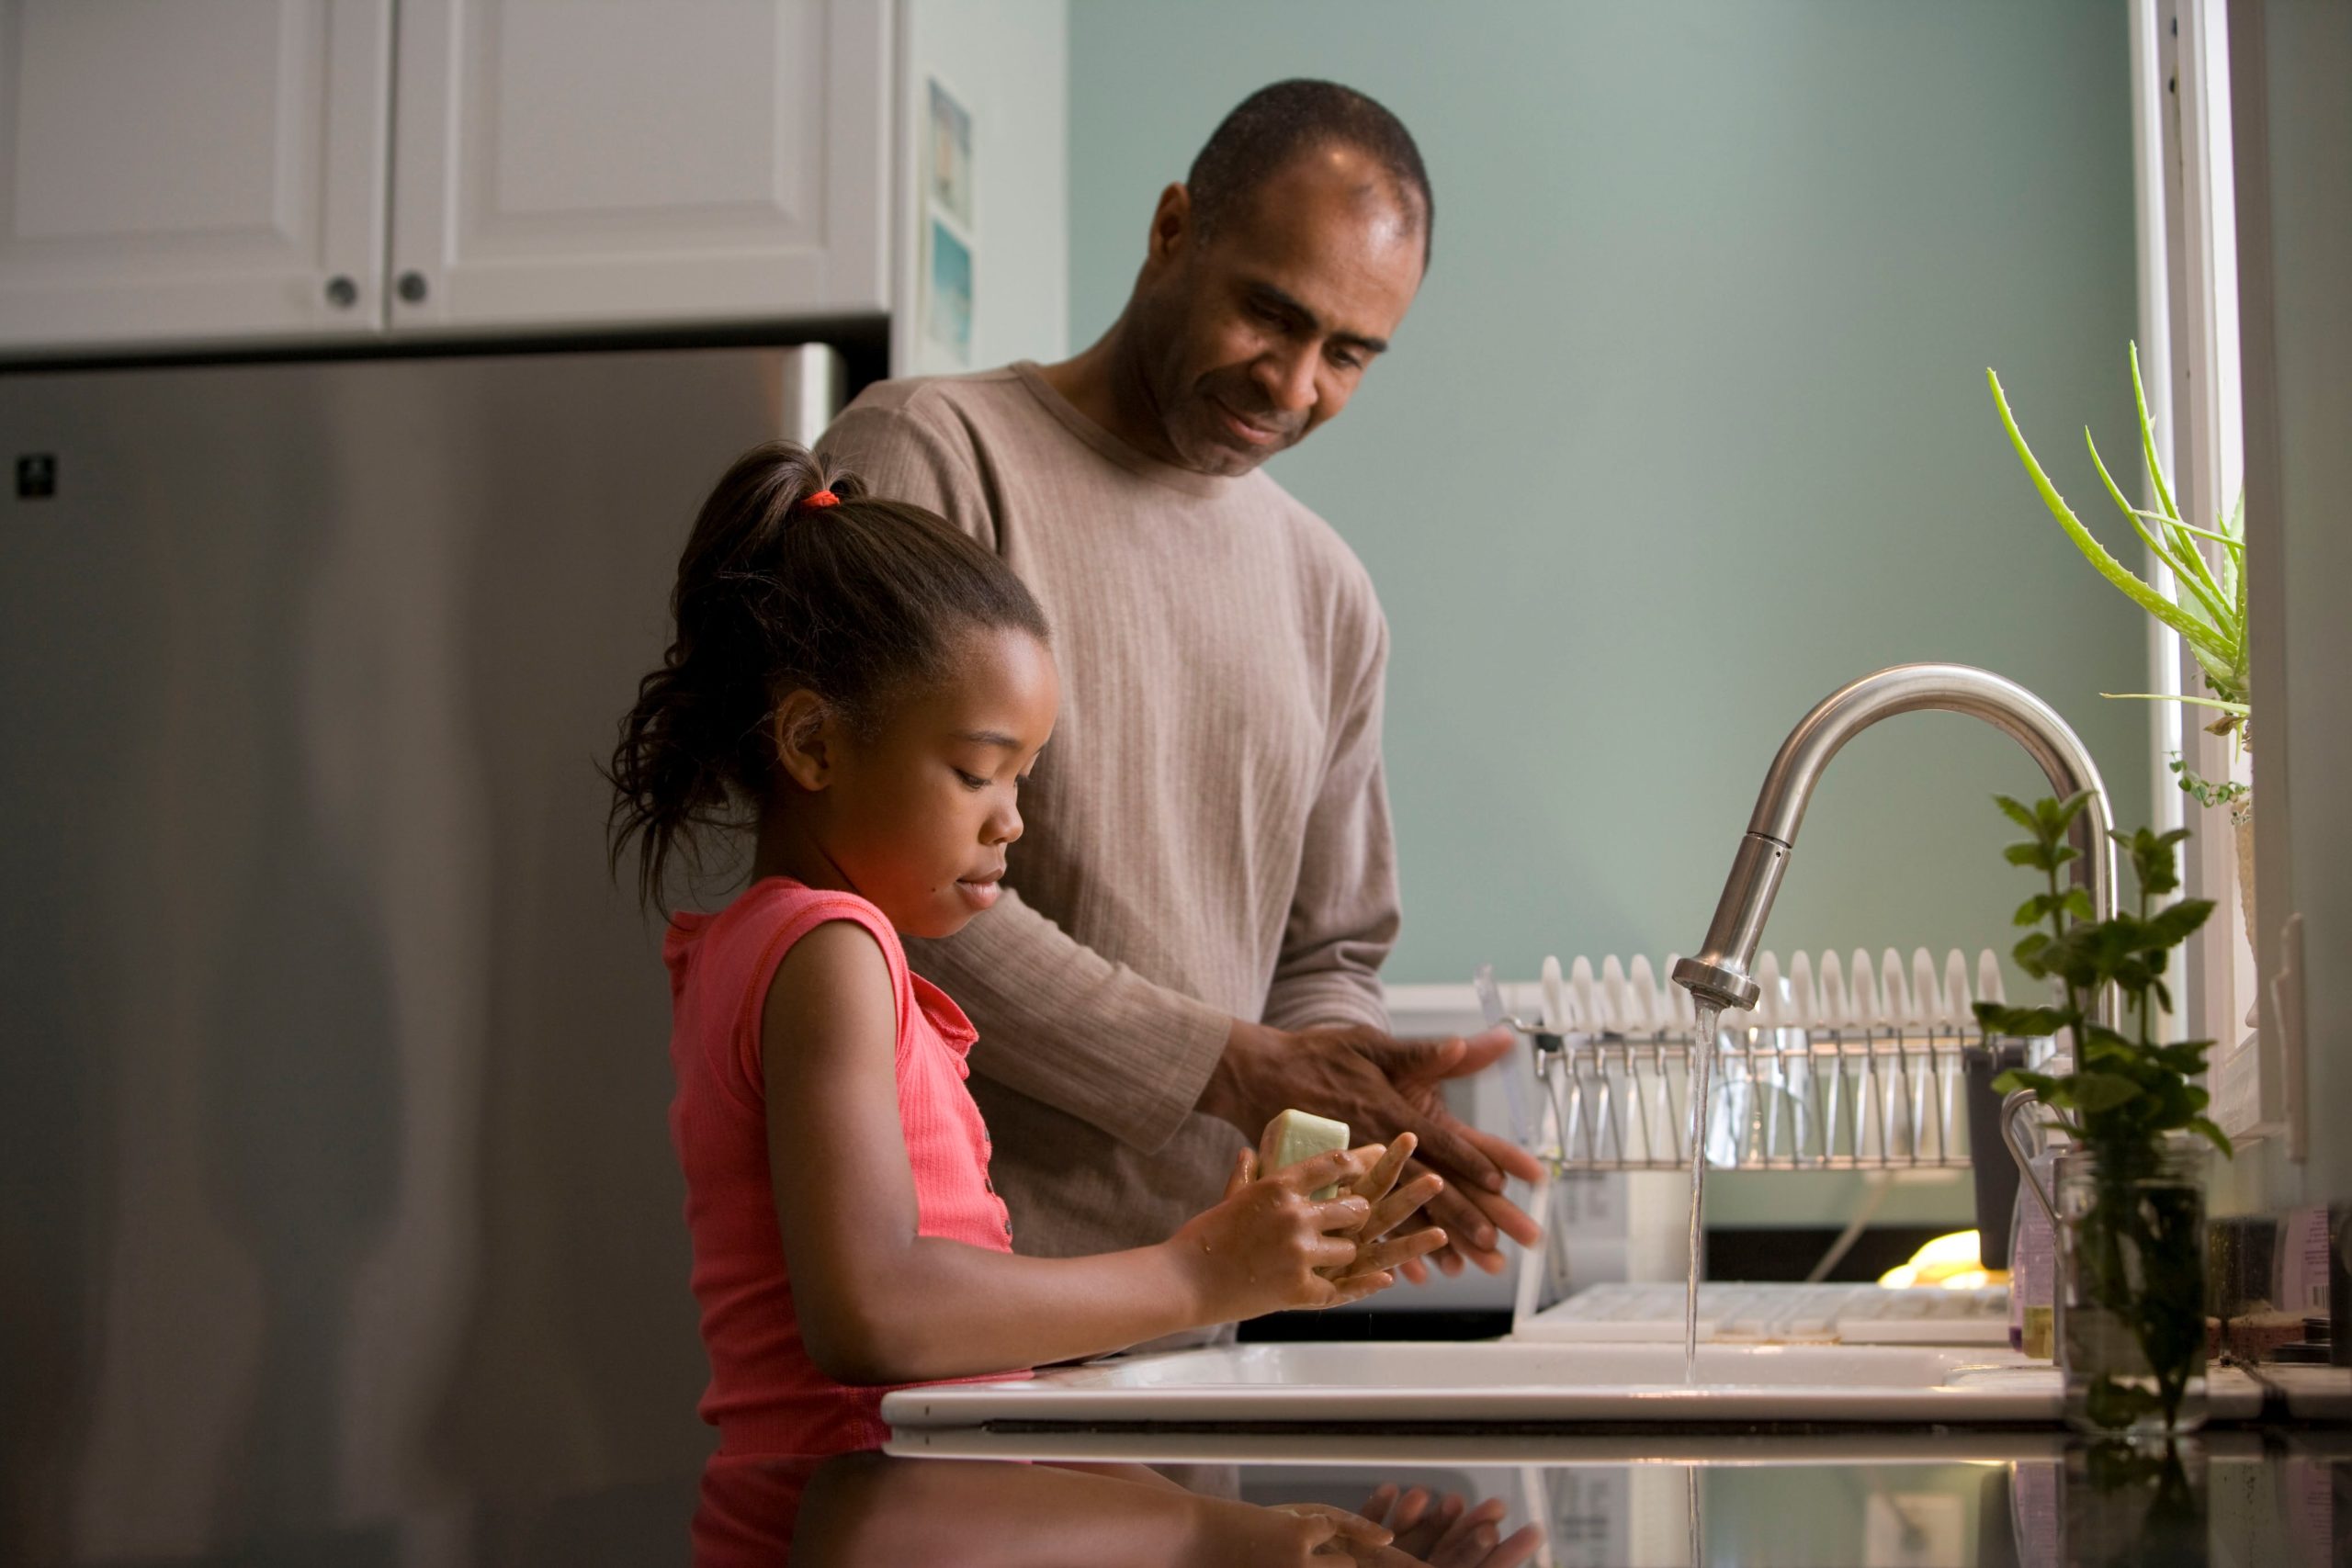 A father and his young daughter, who he shares in child custody, wash dishes together in a kitchen. He smiles watching her as she scrubs a plate carefully by the sink.